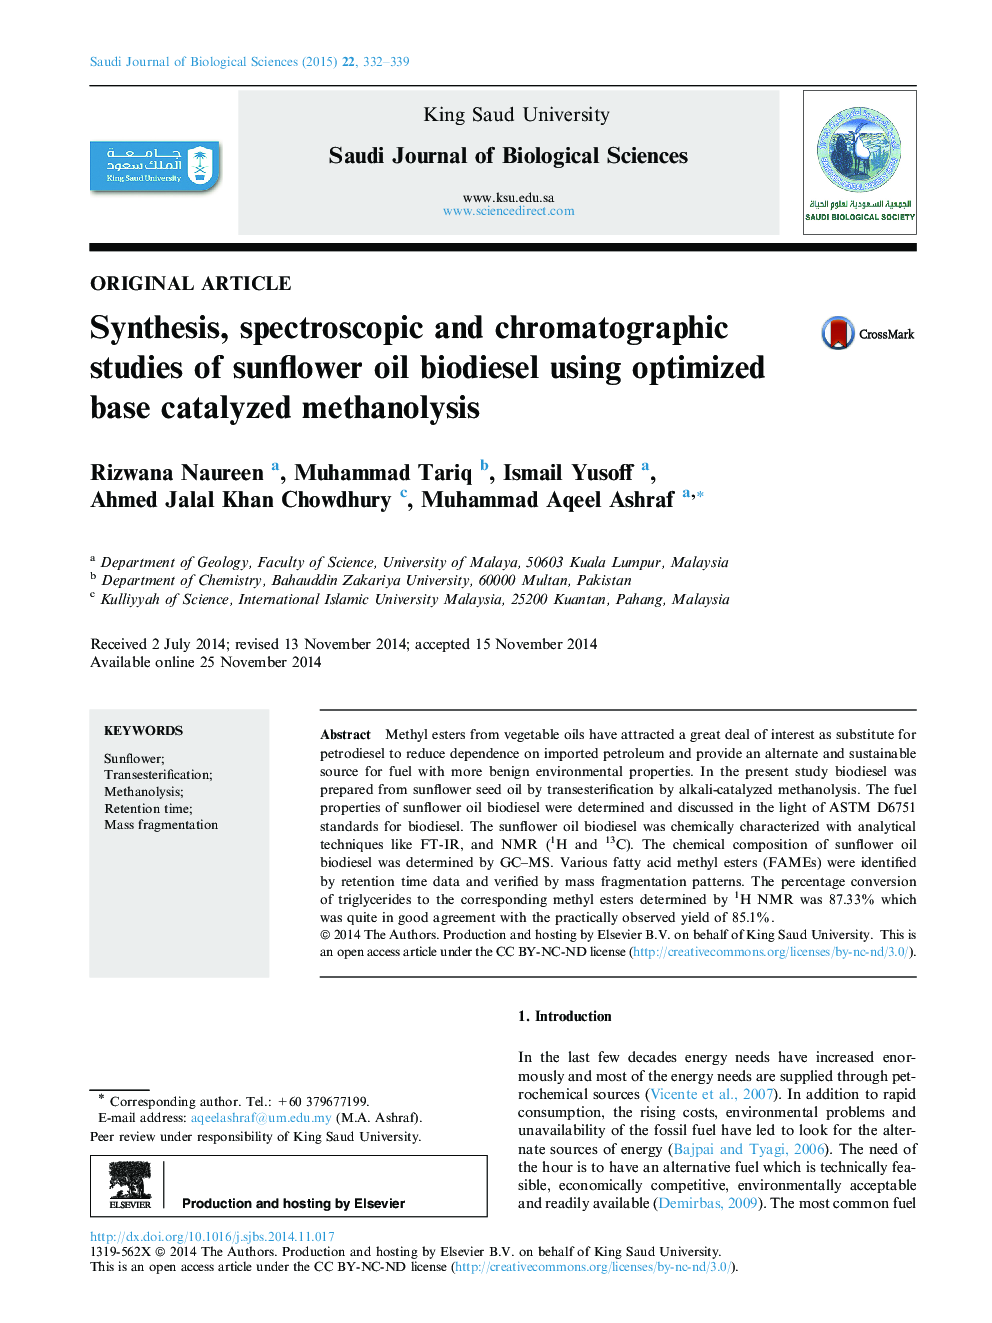 Synthesis, spectroscopic and chromatographic studies of sunflower oil biodiesel using optimized base catalyzed methanolysis 